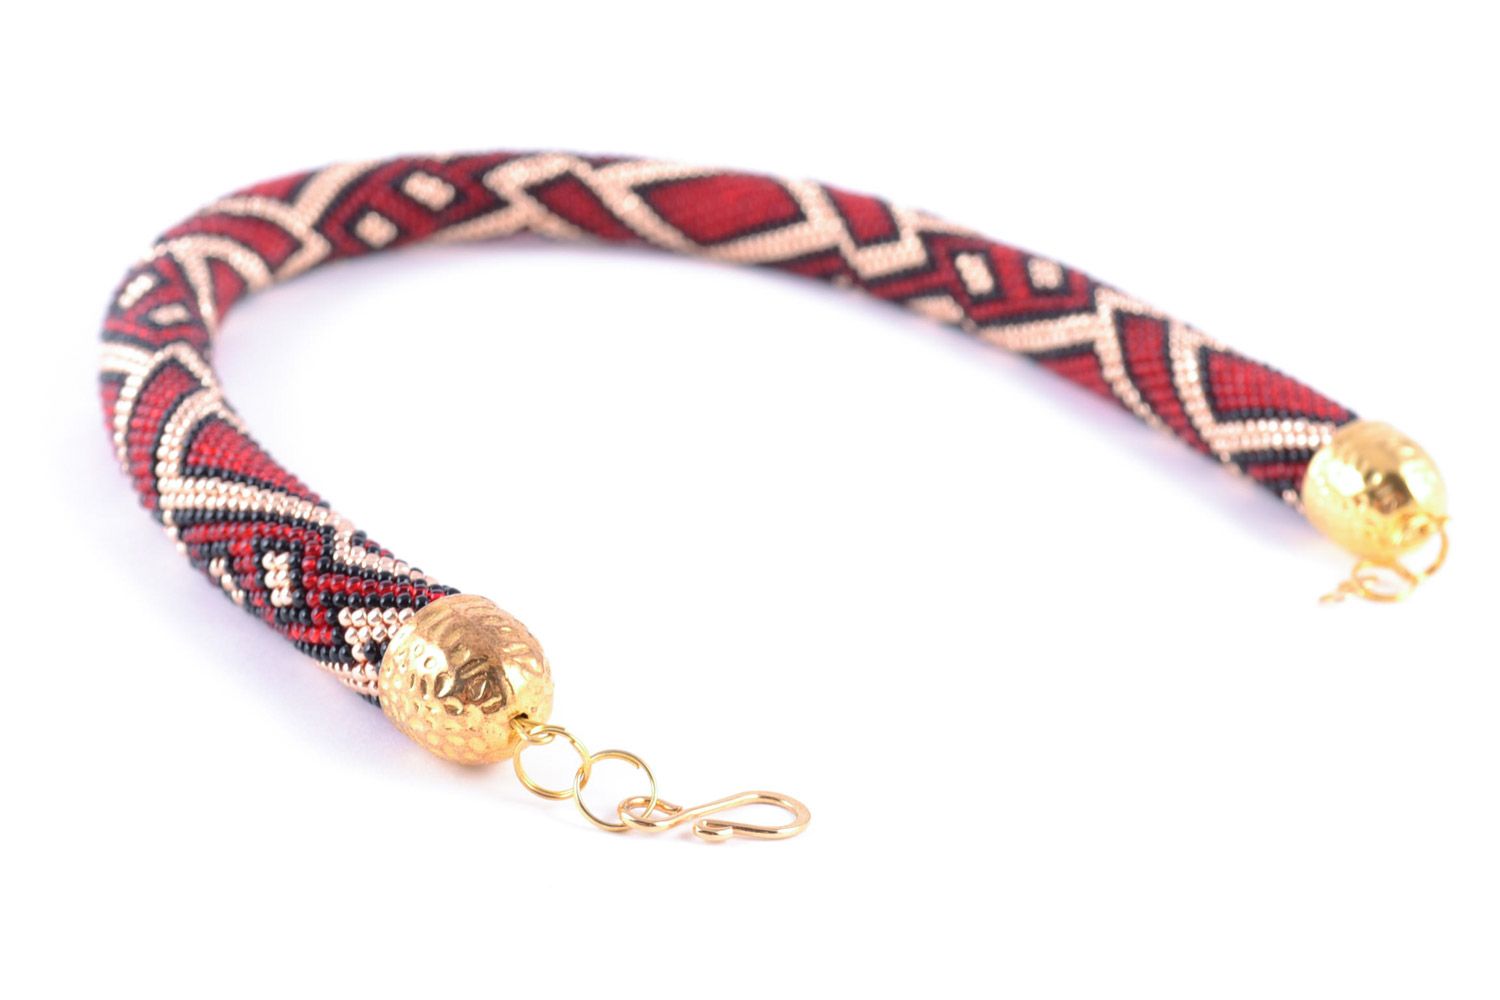 Handmade red Czech bead cord necklace with geometric patterns photo 5